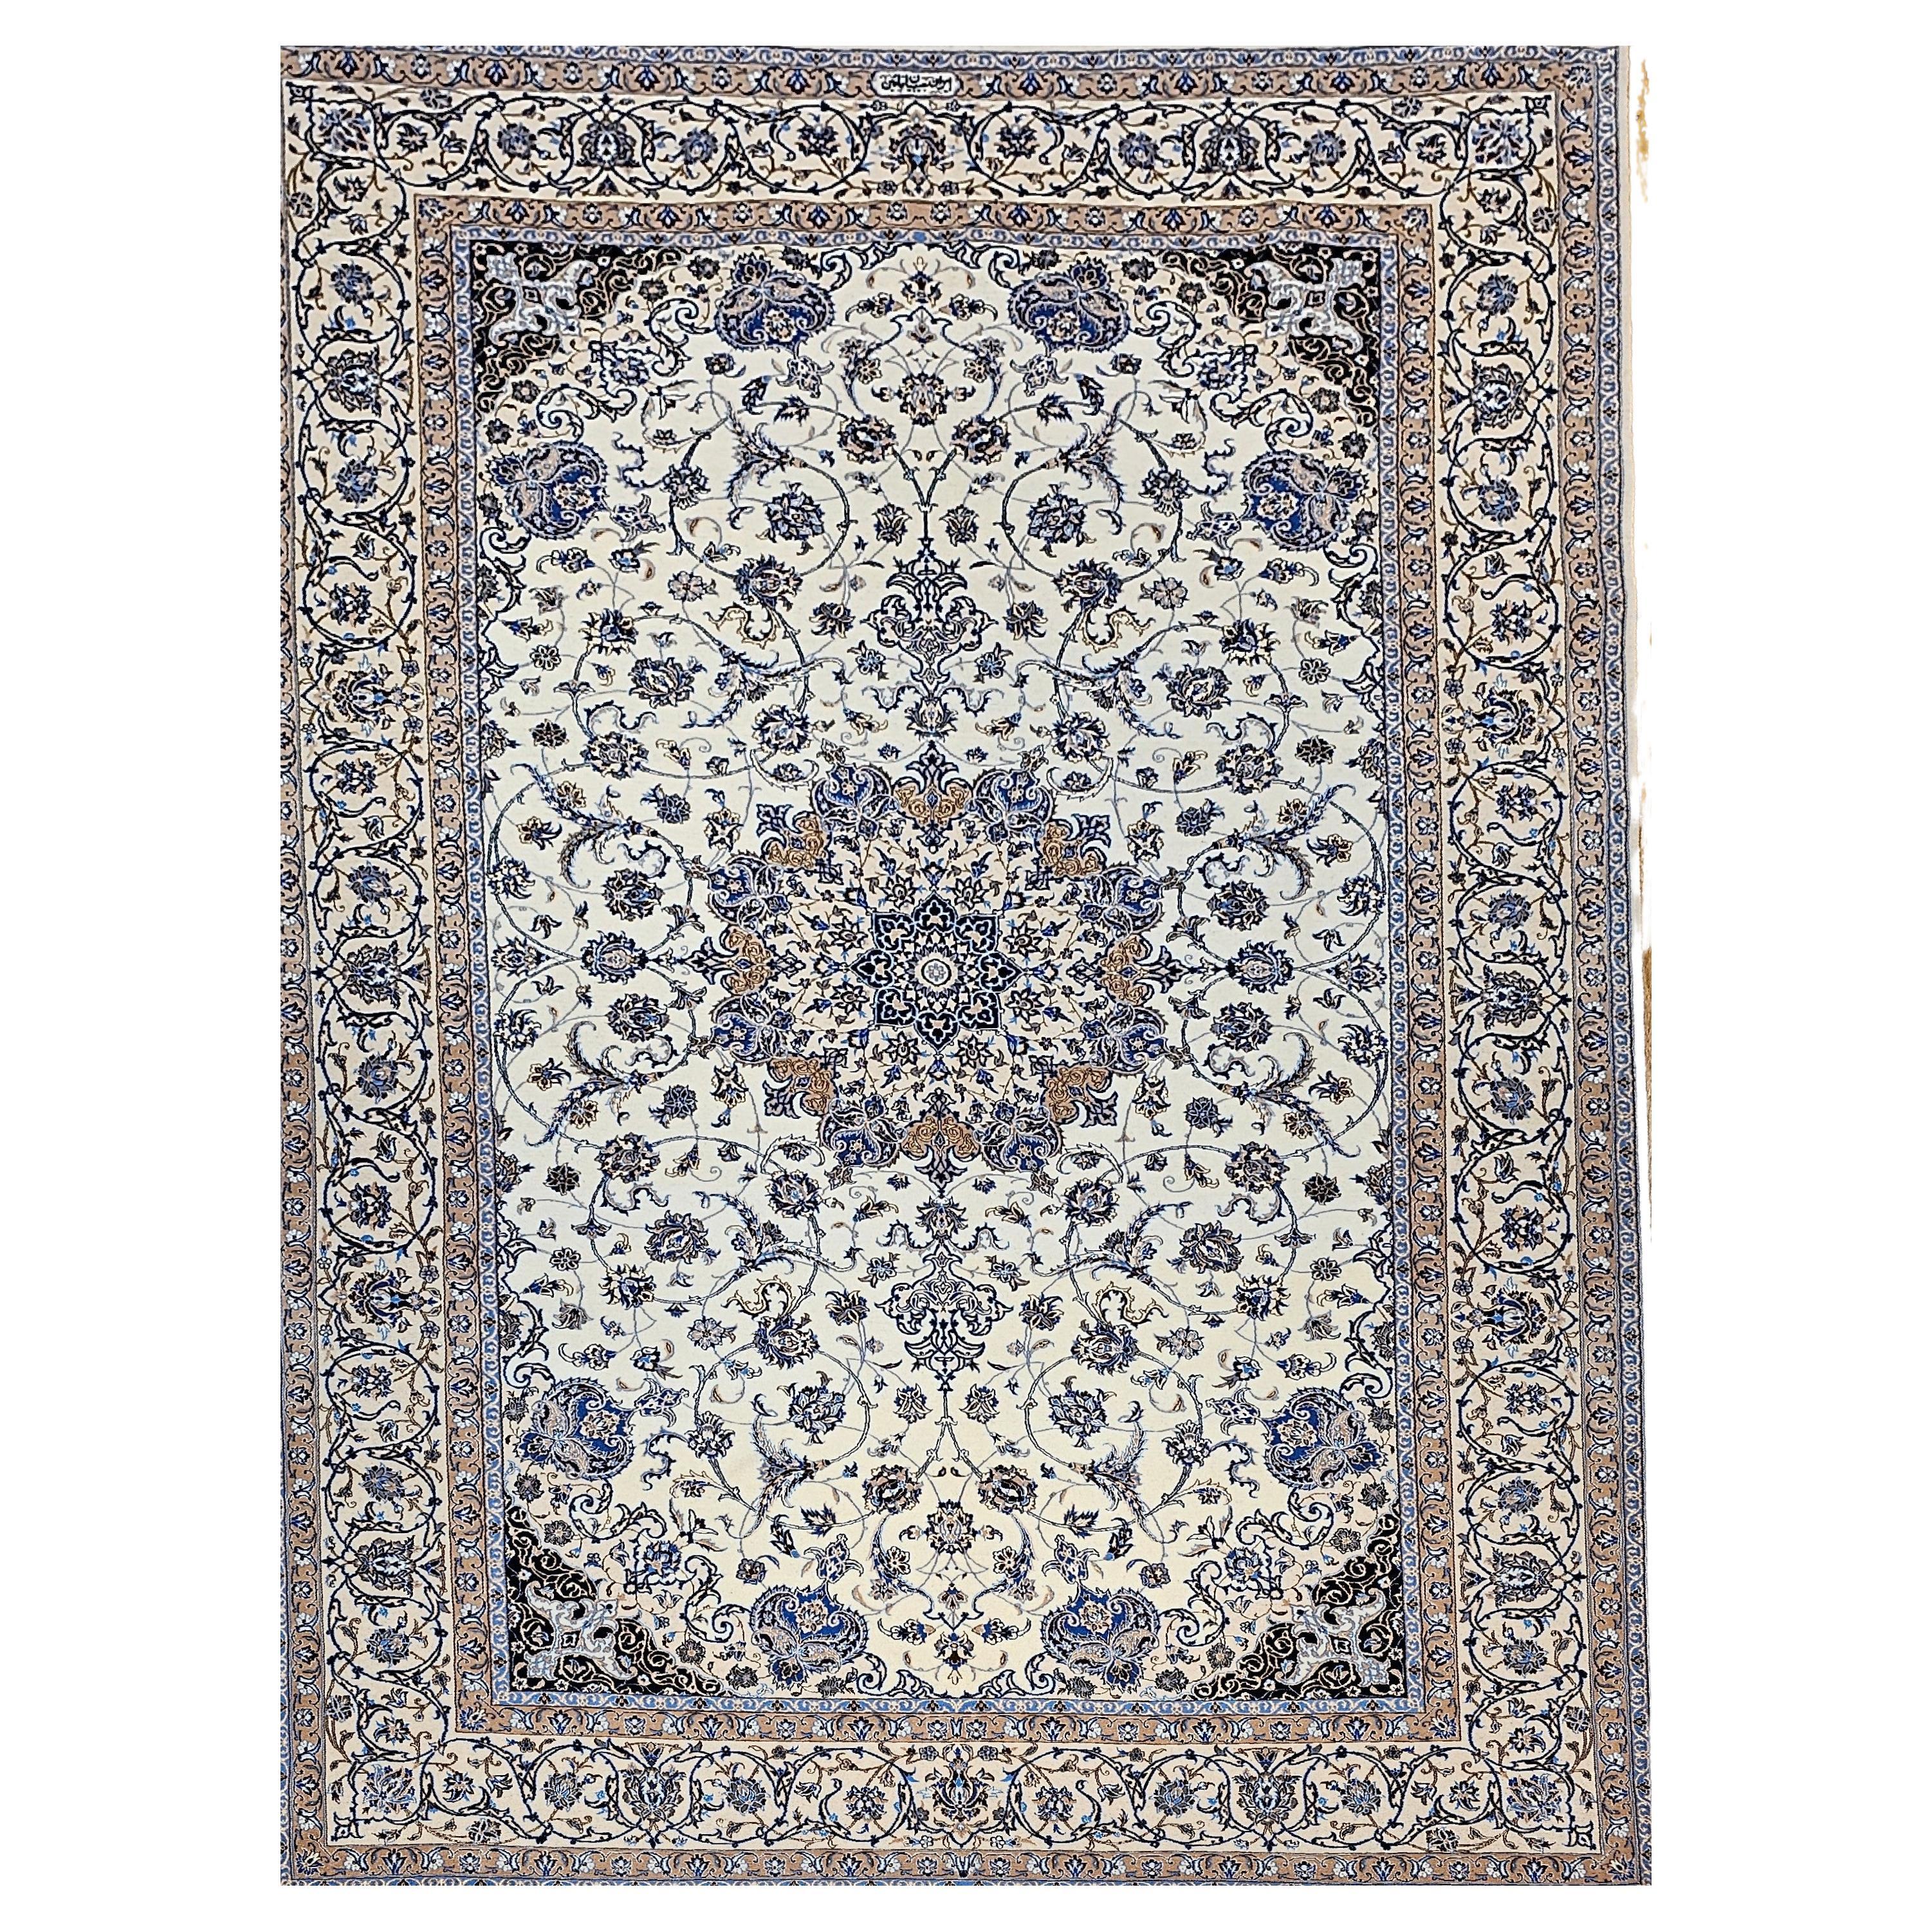 Extremely Fine Weave Persian Nain Habibian in Floral Pattern with Silk Highlight